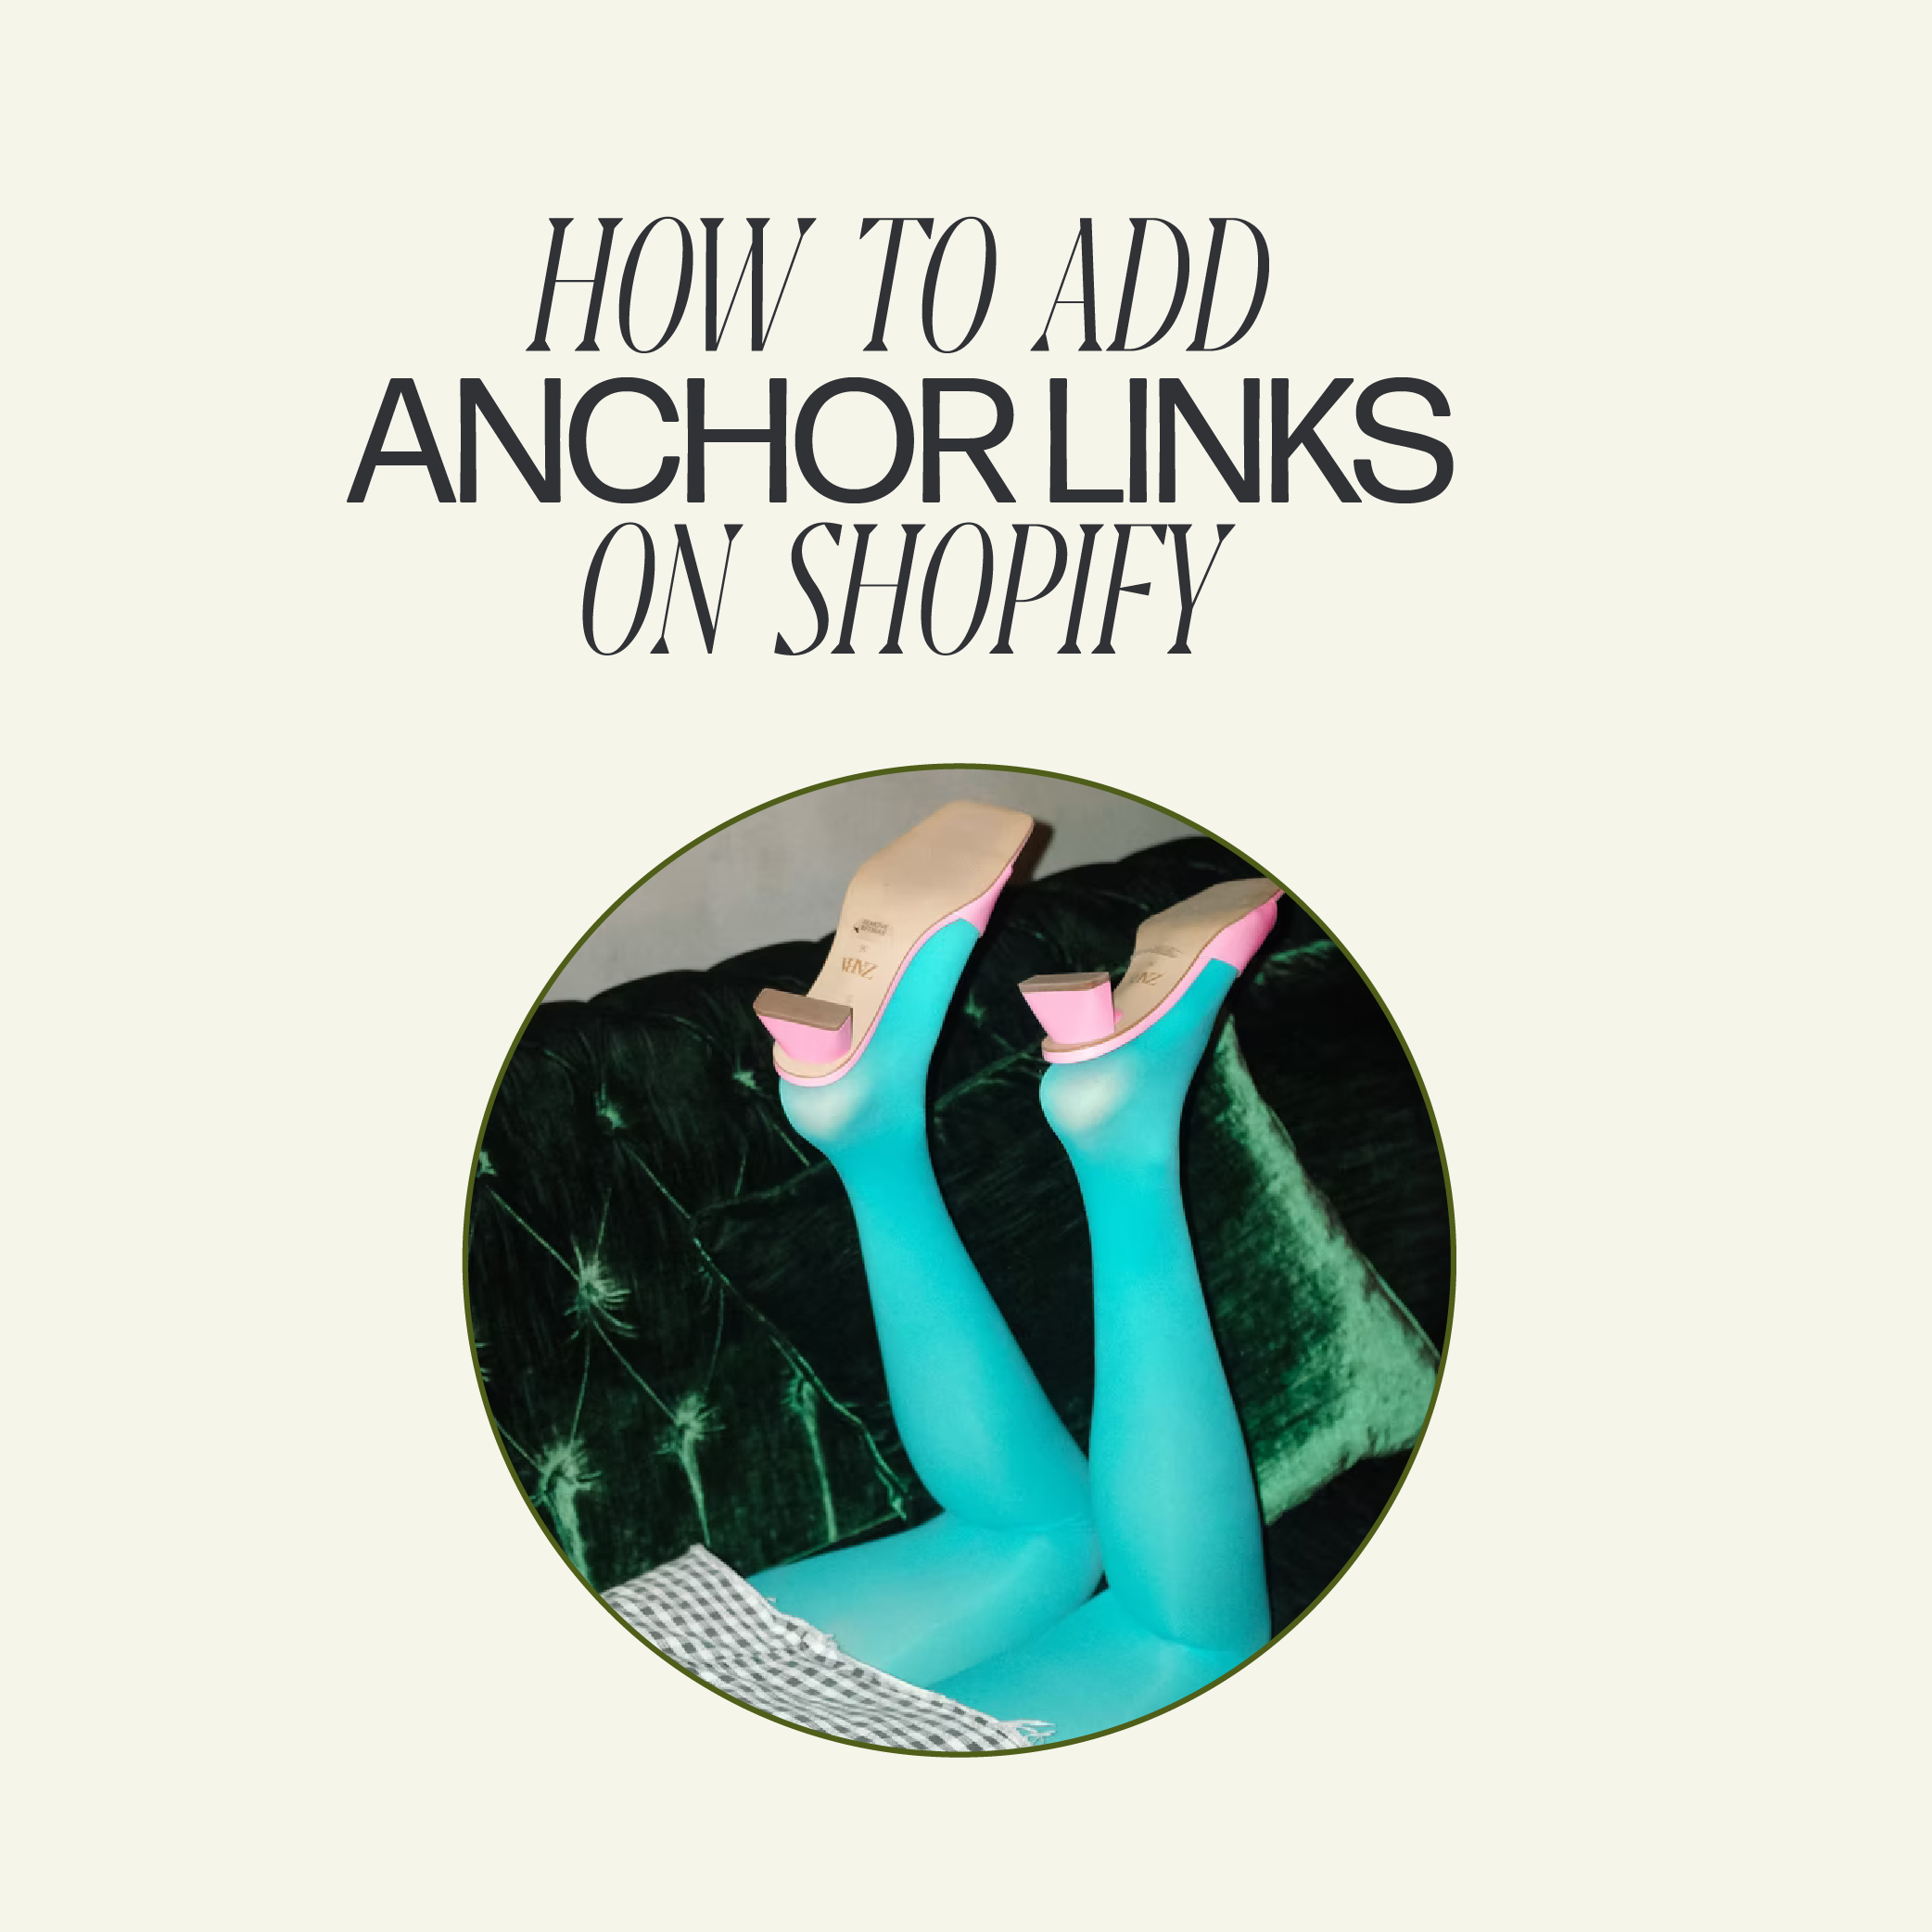 How to Add Anchor Links on Shopify